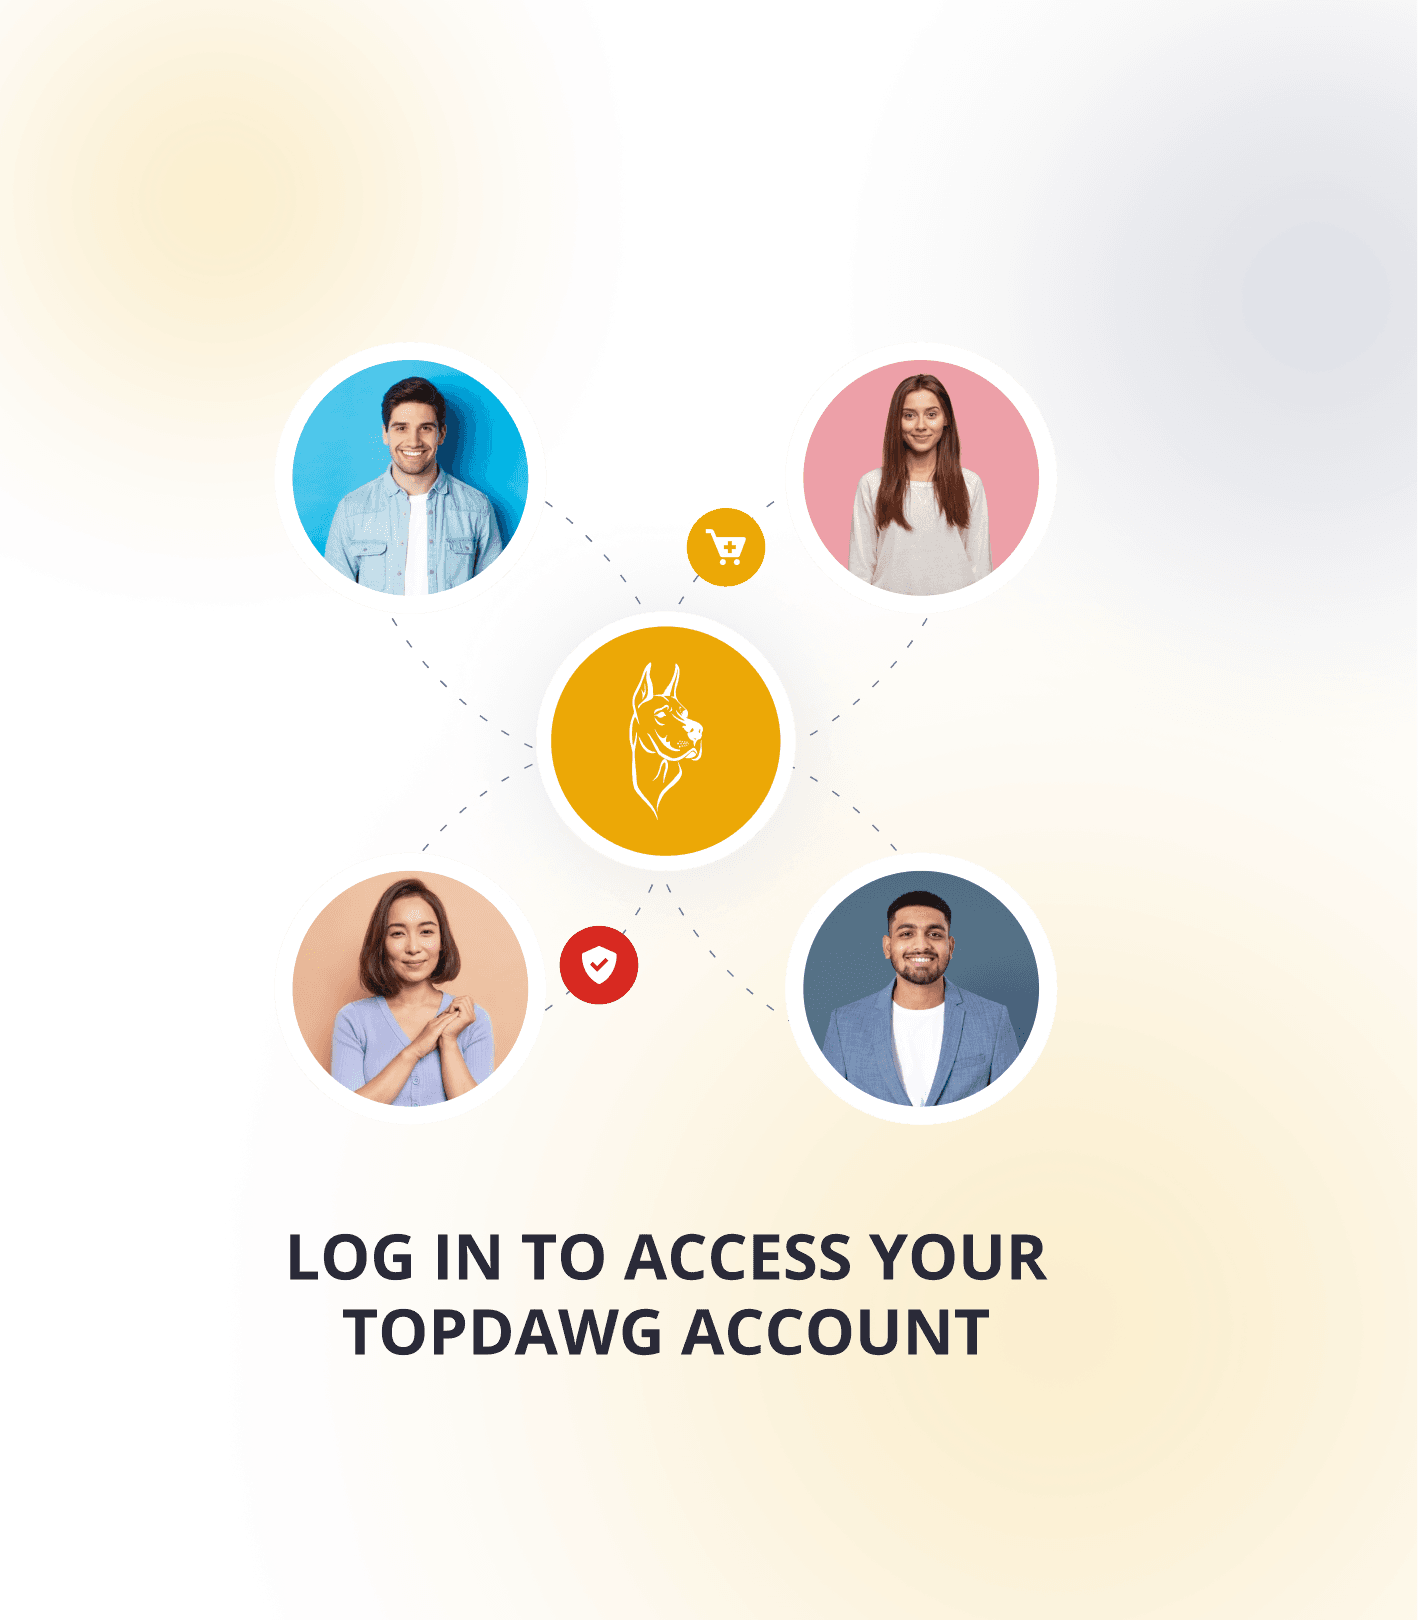 Log in to Access Your TopDawg Account